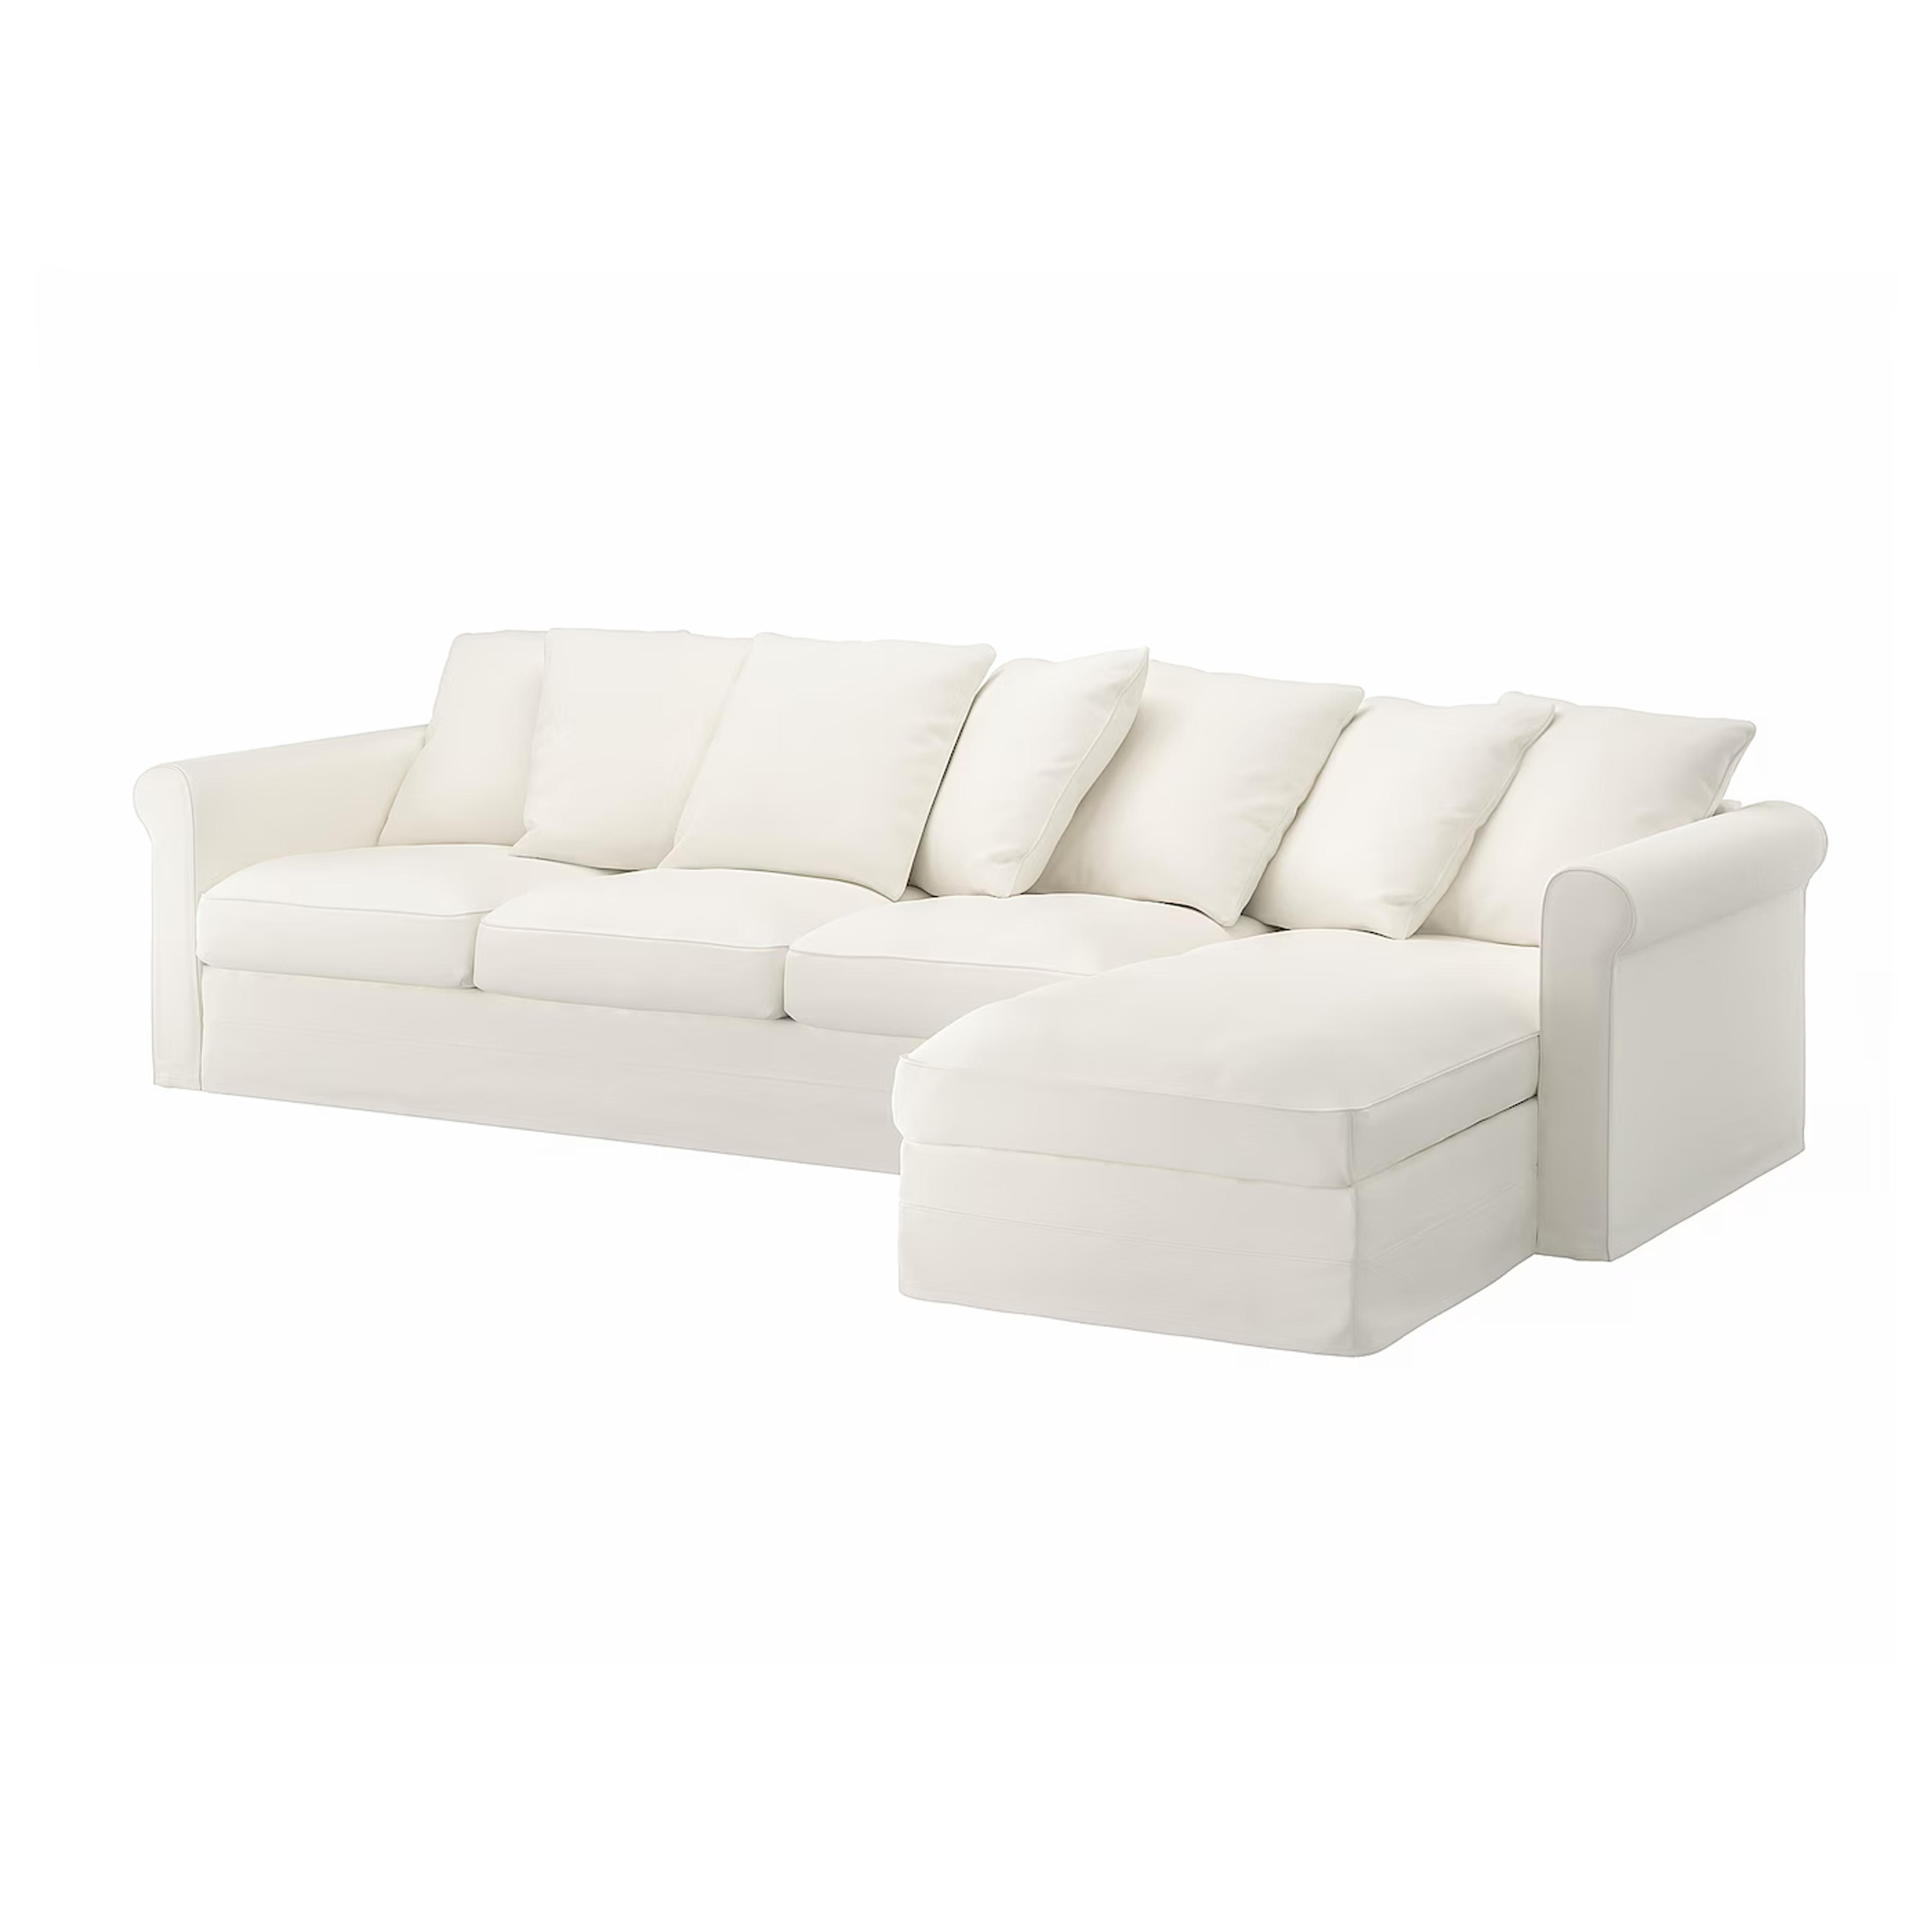 HÄRLANDA - sectional, 4-seat, with chaise/Inseros white